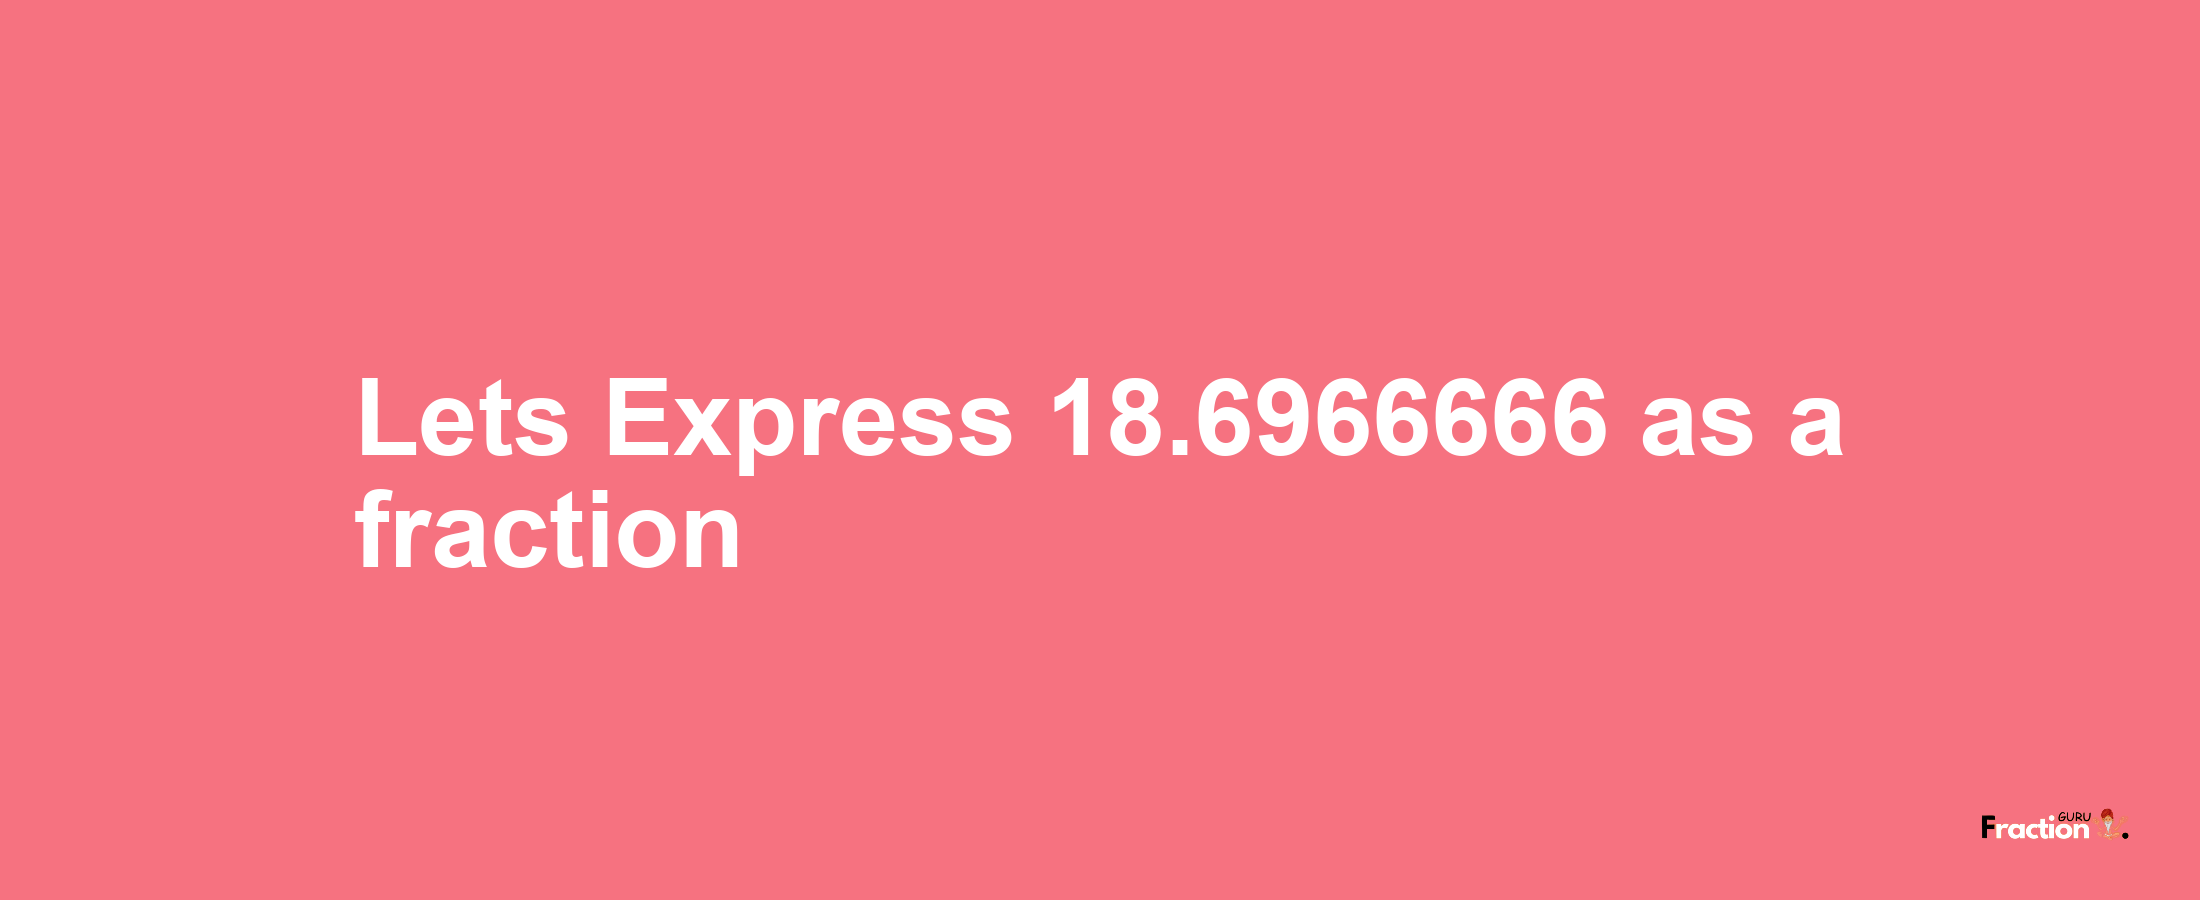 Lets Express 18.6966666 as afraction